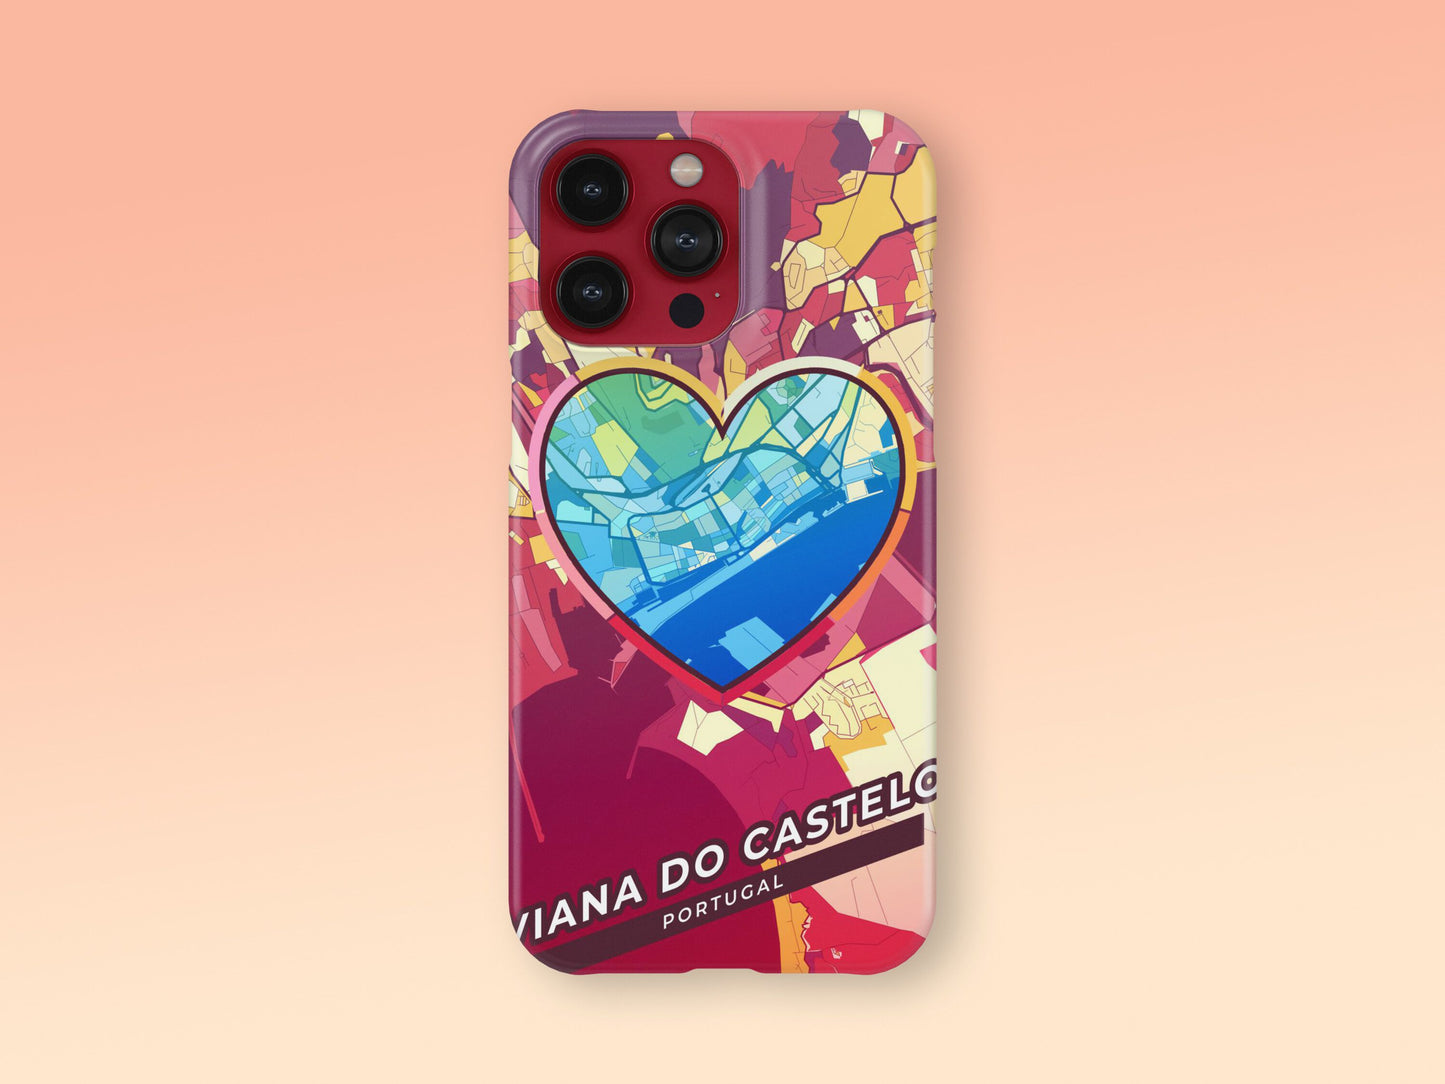 Viana Do Castelo Portugal slim phone case with colorful icon 2